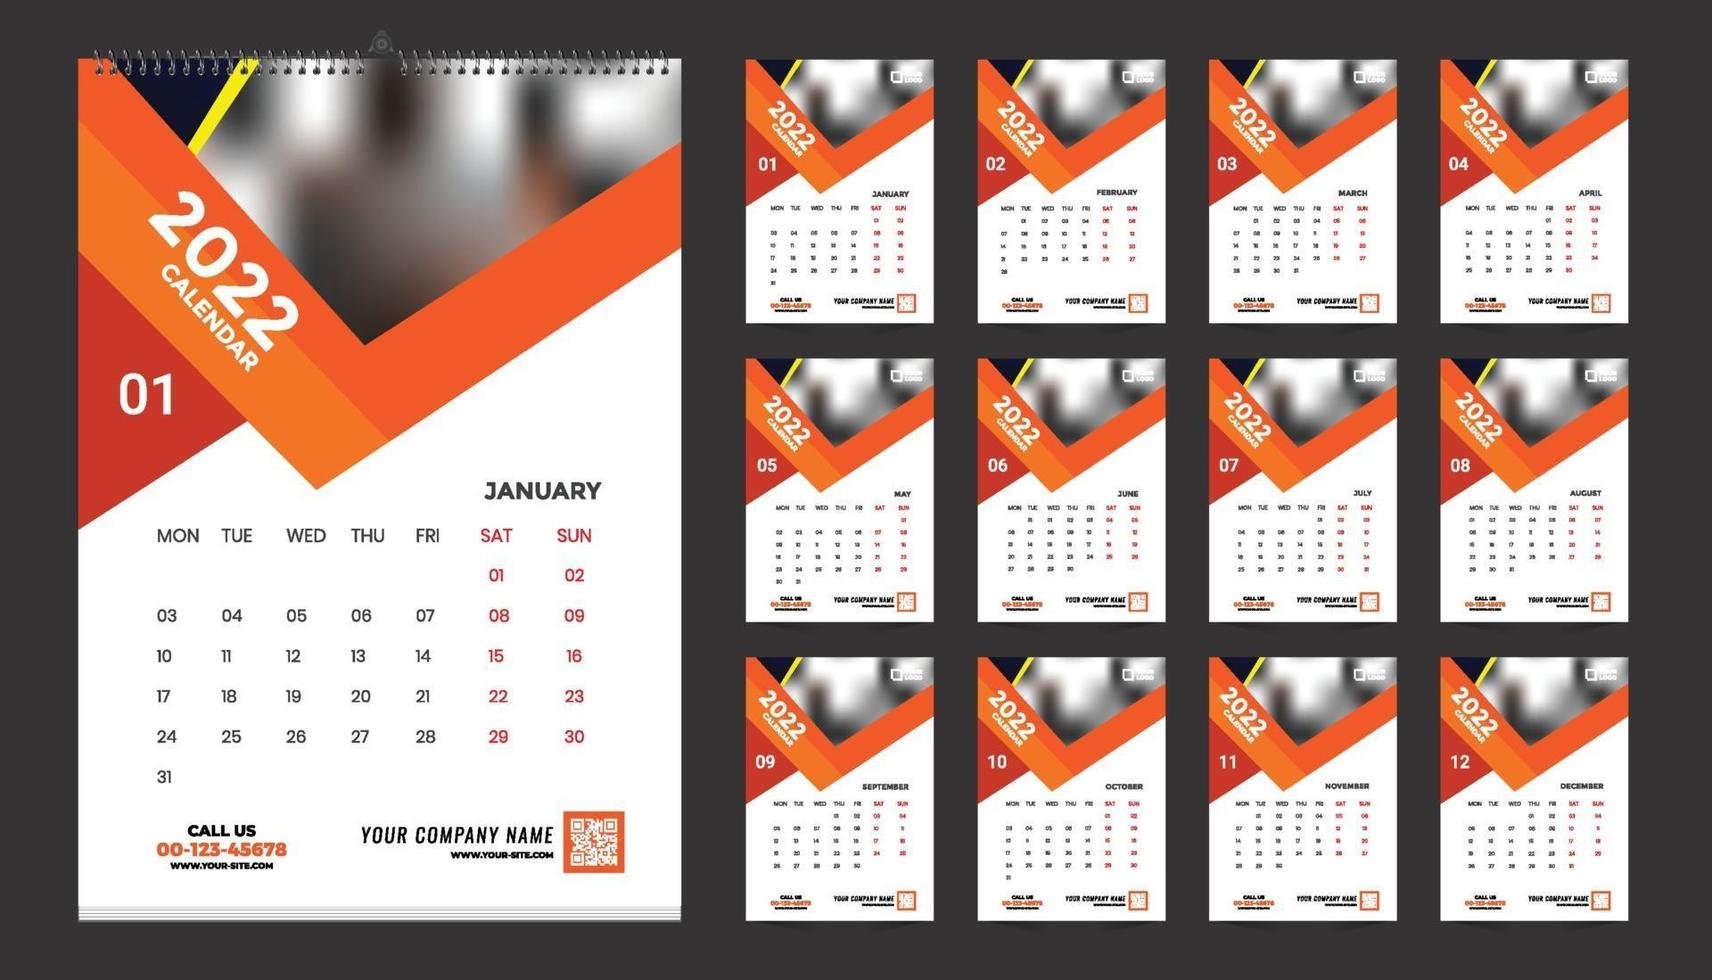 Monthly wall calendar template design for 2022, year. Week starts on Sunday. Planner diary with Place for Photo. vector